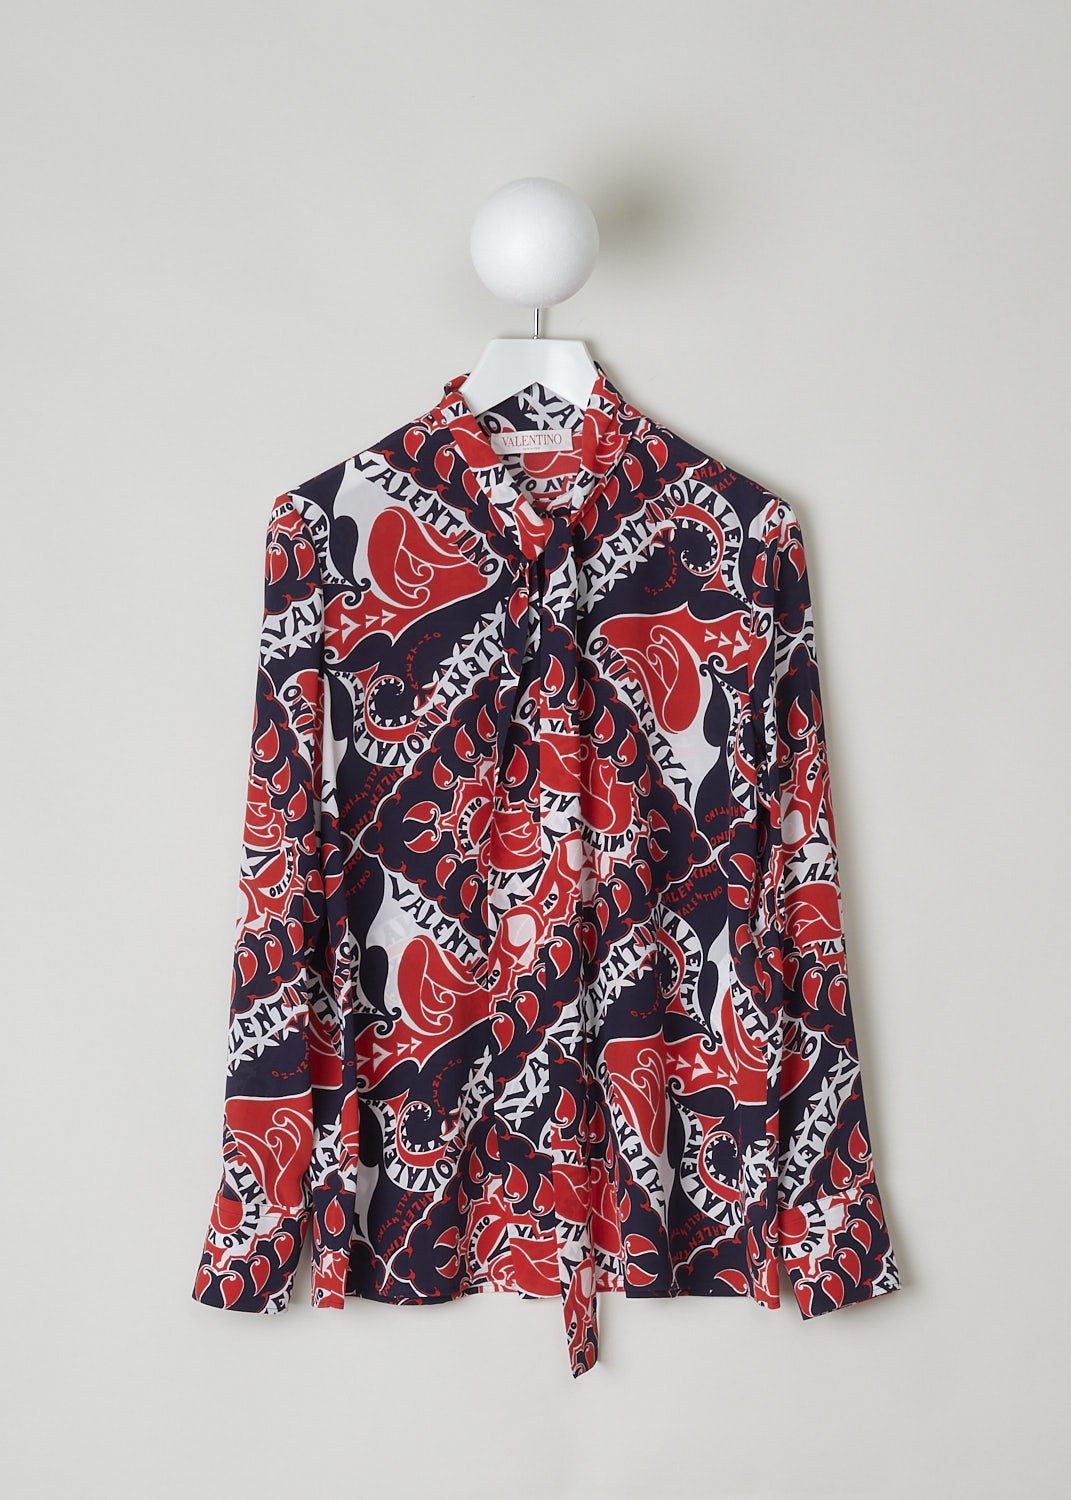 VALENTINO, BOLD PRINTED TIE DETAIL BLOUSE, 1B3AB3Y27AP_01N, Print, Red, Blue, Front, This bold printed silk blouse has a collar with a self tie detail. The blouse has a concealed front button closure and buttoned cuffs. The hemline is straight. 
